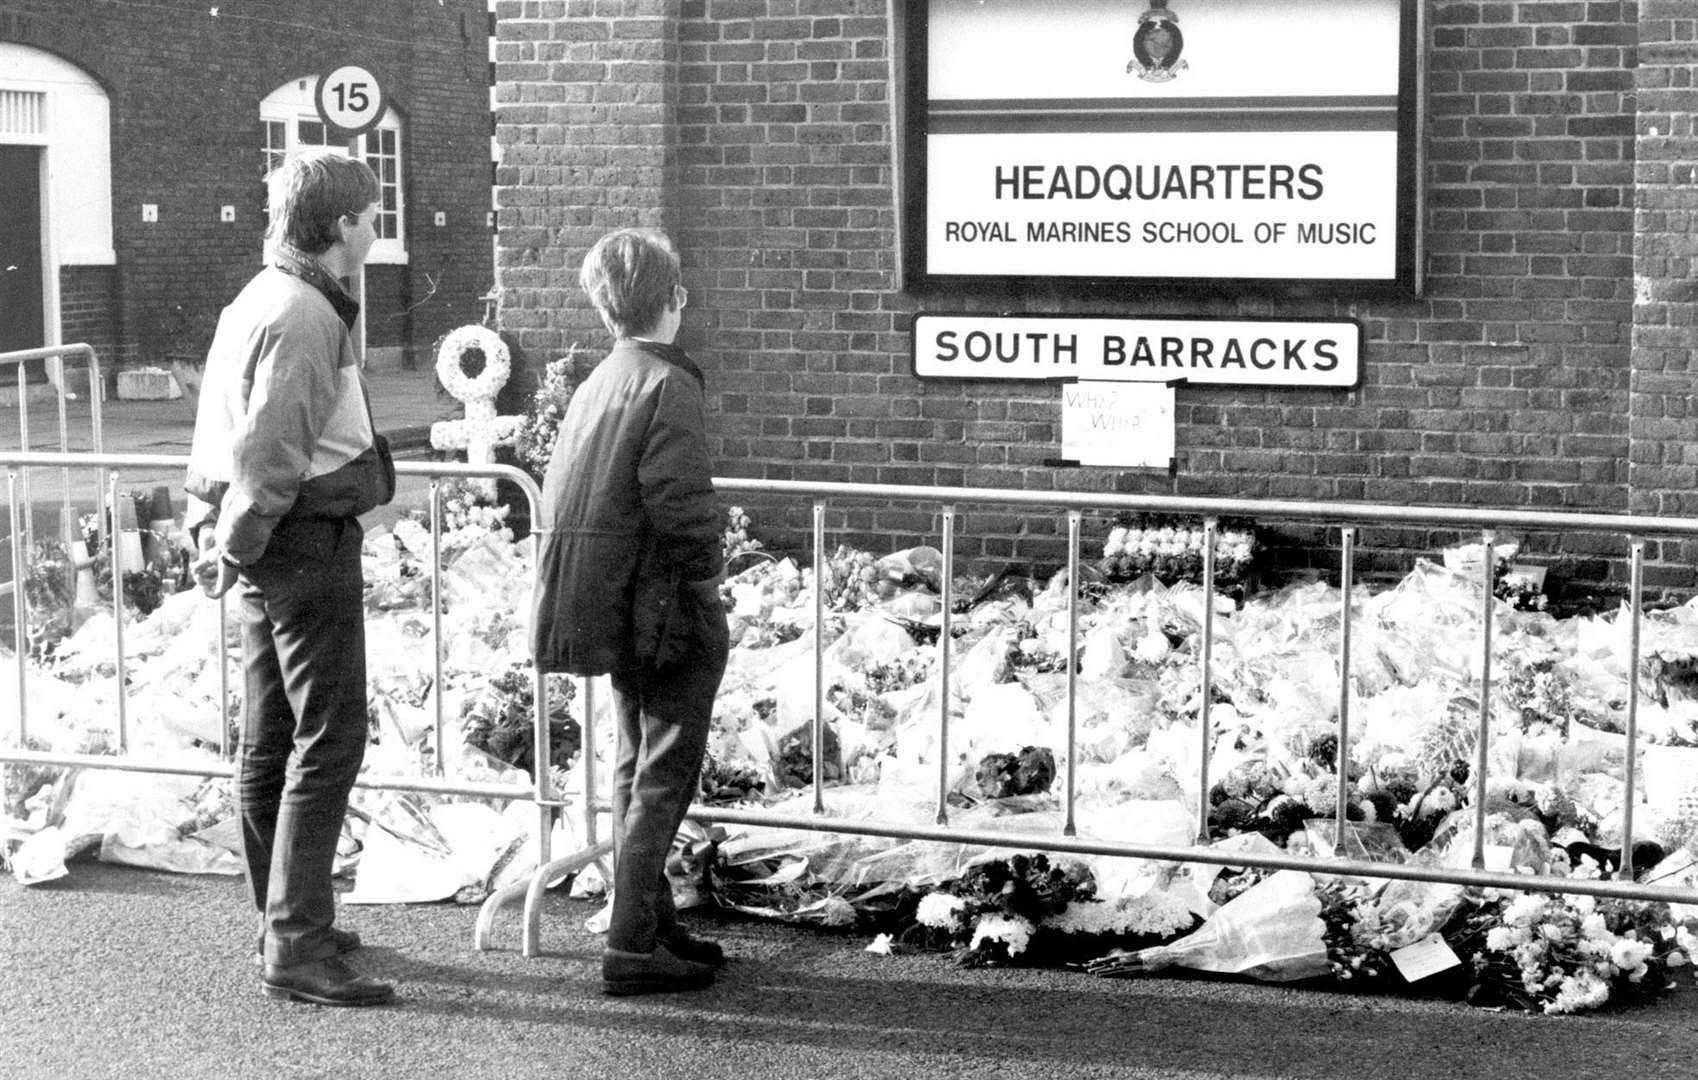 Flowers left at the South Barracks where the explosion happened